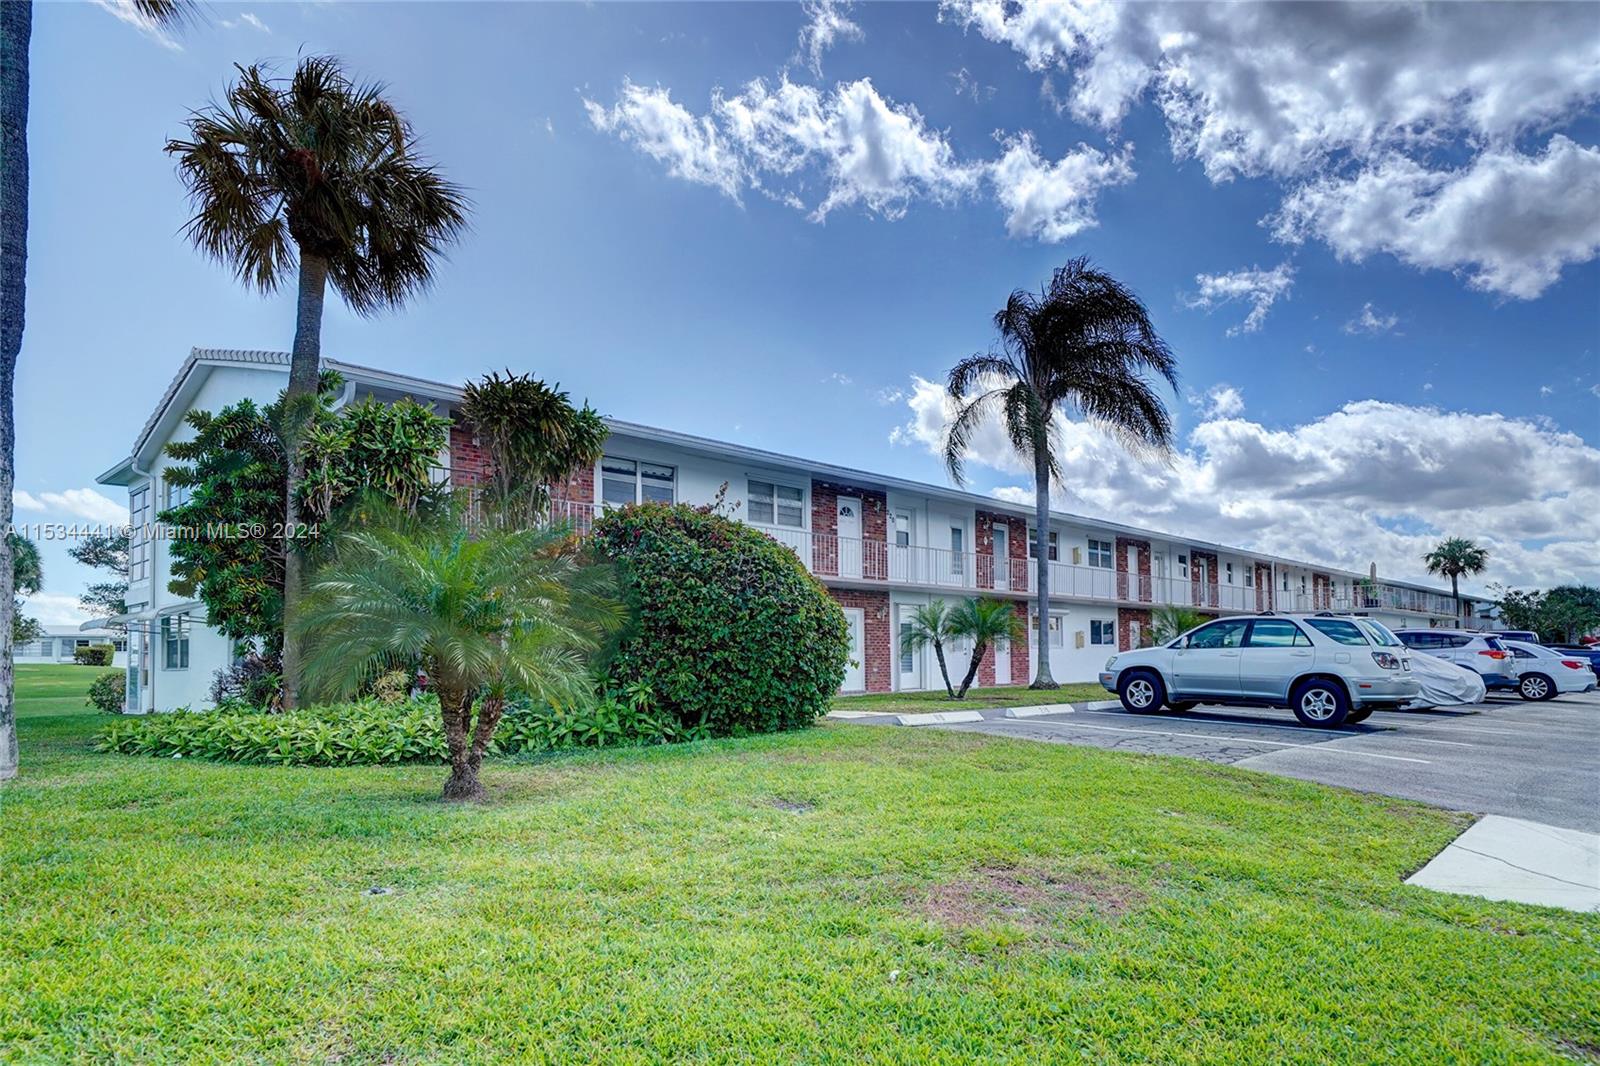 2800 W Golf Blvd 219, Pompano Beach, Florida 33064, 2 Bedrooms Bedrooms, ,1 BathroomBathrooms,Residential,For Sale,2800 W Golf Blvd 219,A11534441